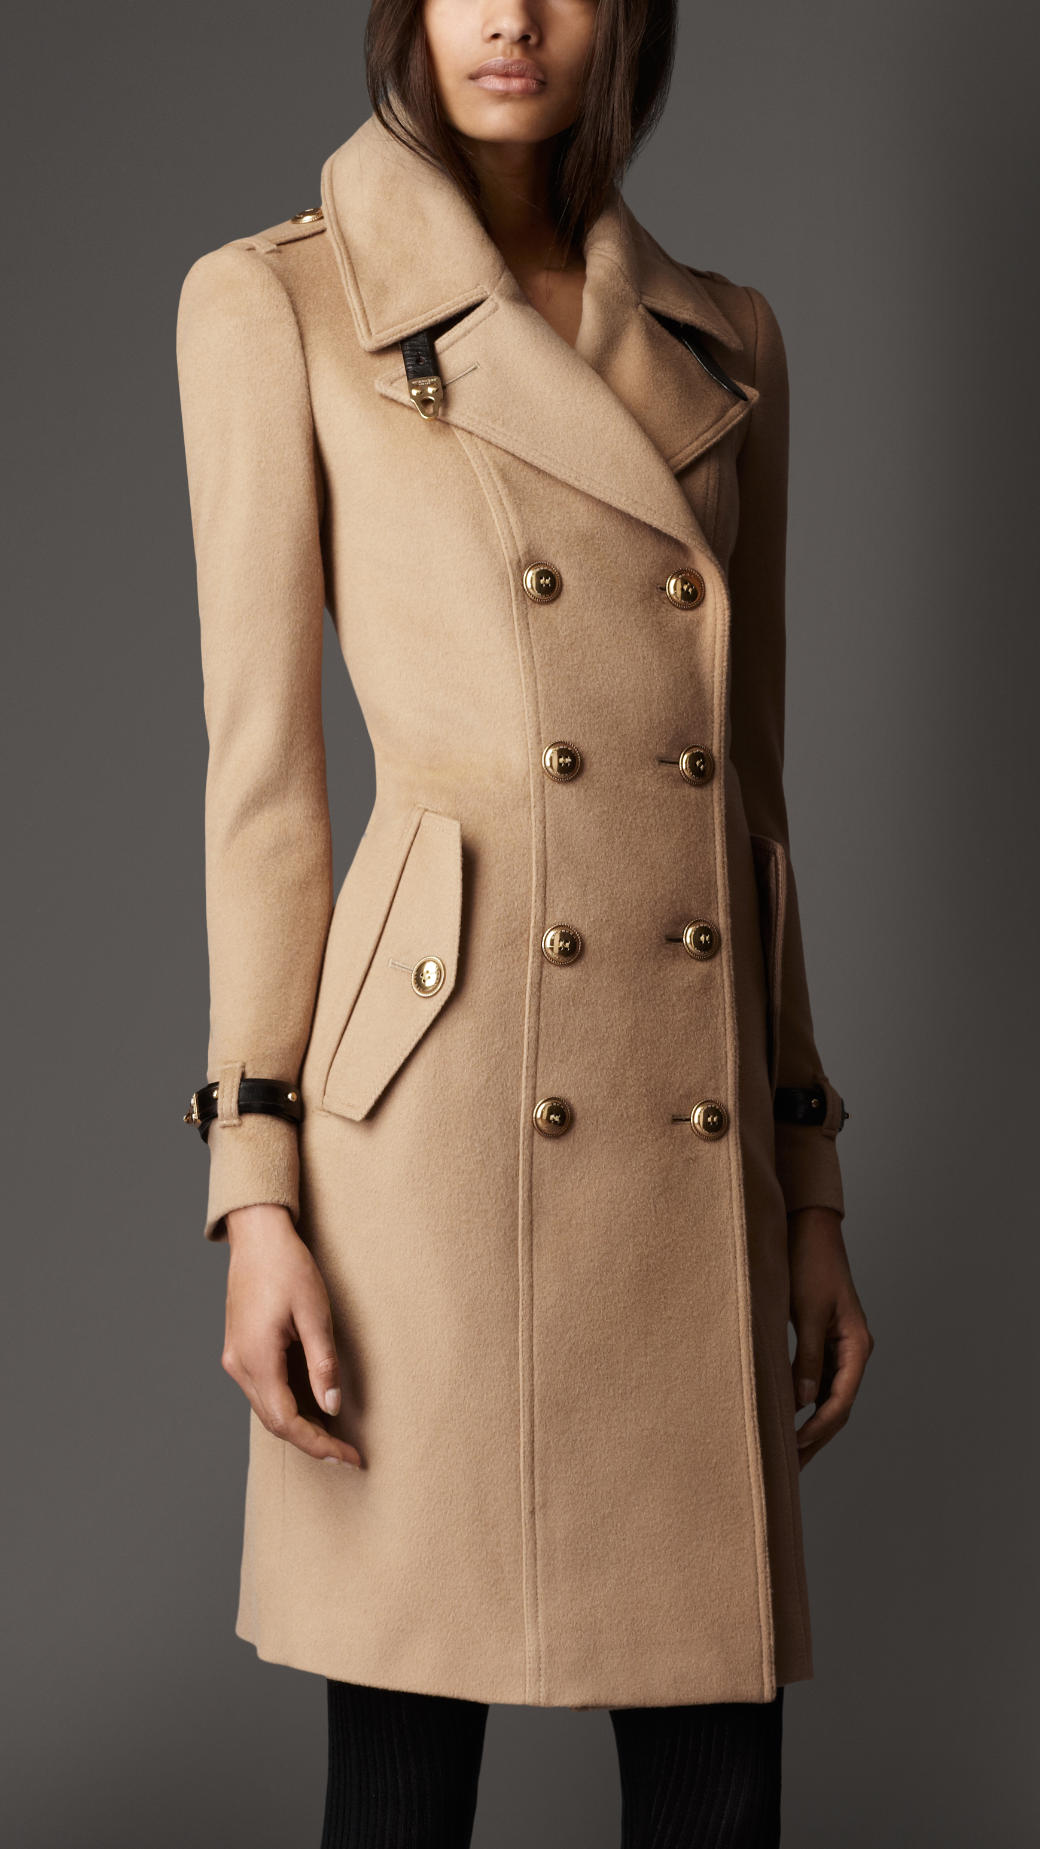 Burberry Leather Detail Wool Cashmere Coat in Camel (Natural) - Lyst